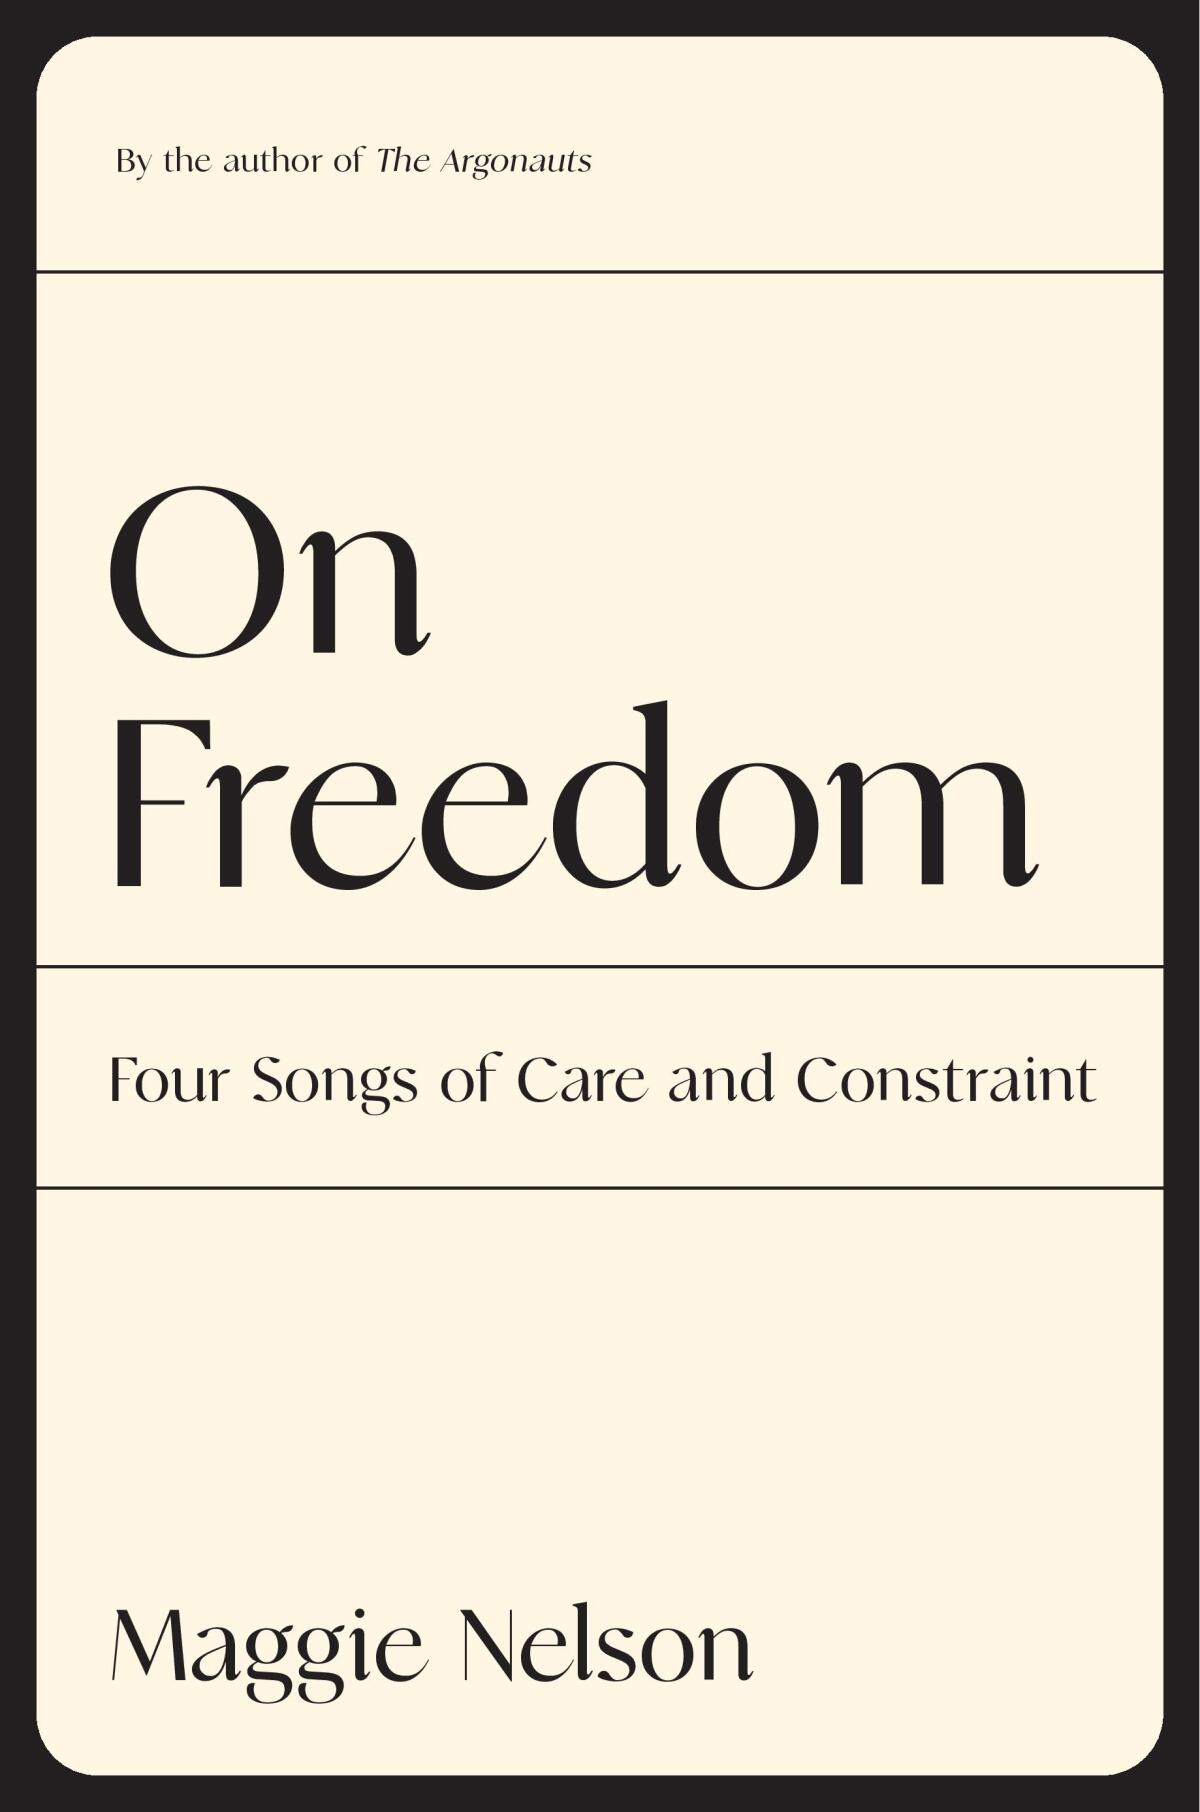 "On Freedom," by Maggie Nelson